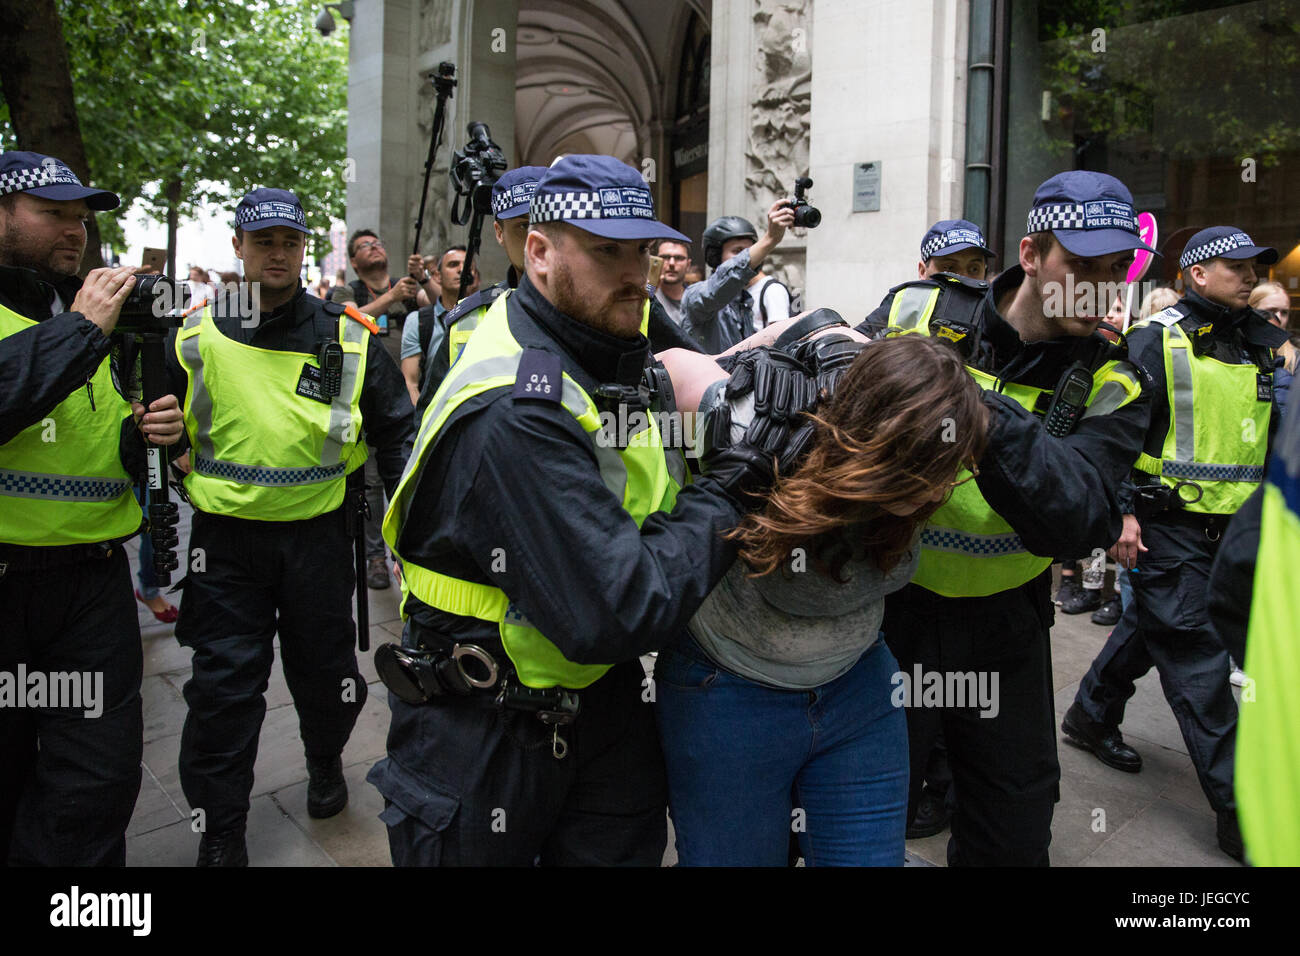 London, UK. 24th June, 2017. Police officers arrest a woman among anti-fascists holding a counter-protest to a march by the far-right English Defence League in central London. Credit: Mark Kerrison/Alamy Live News Stock Photo